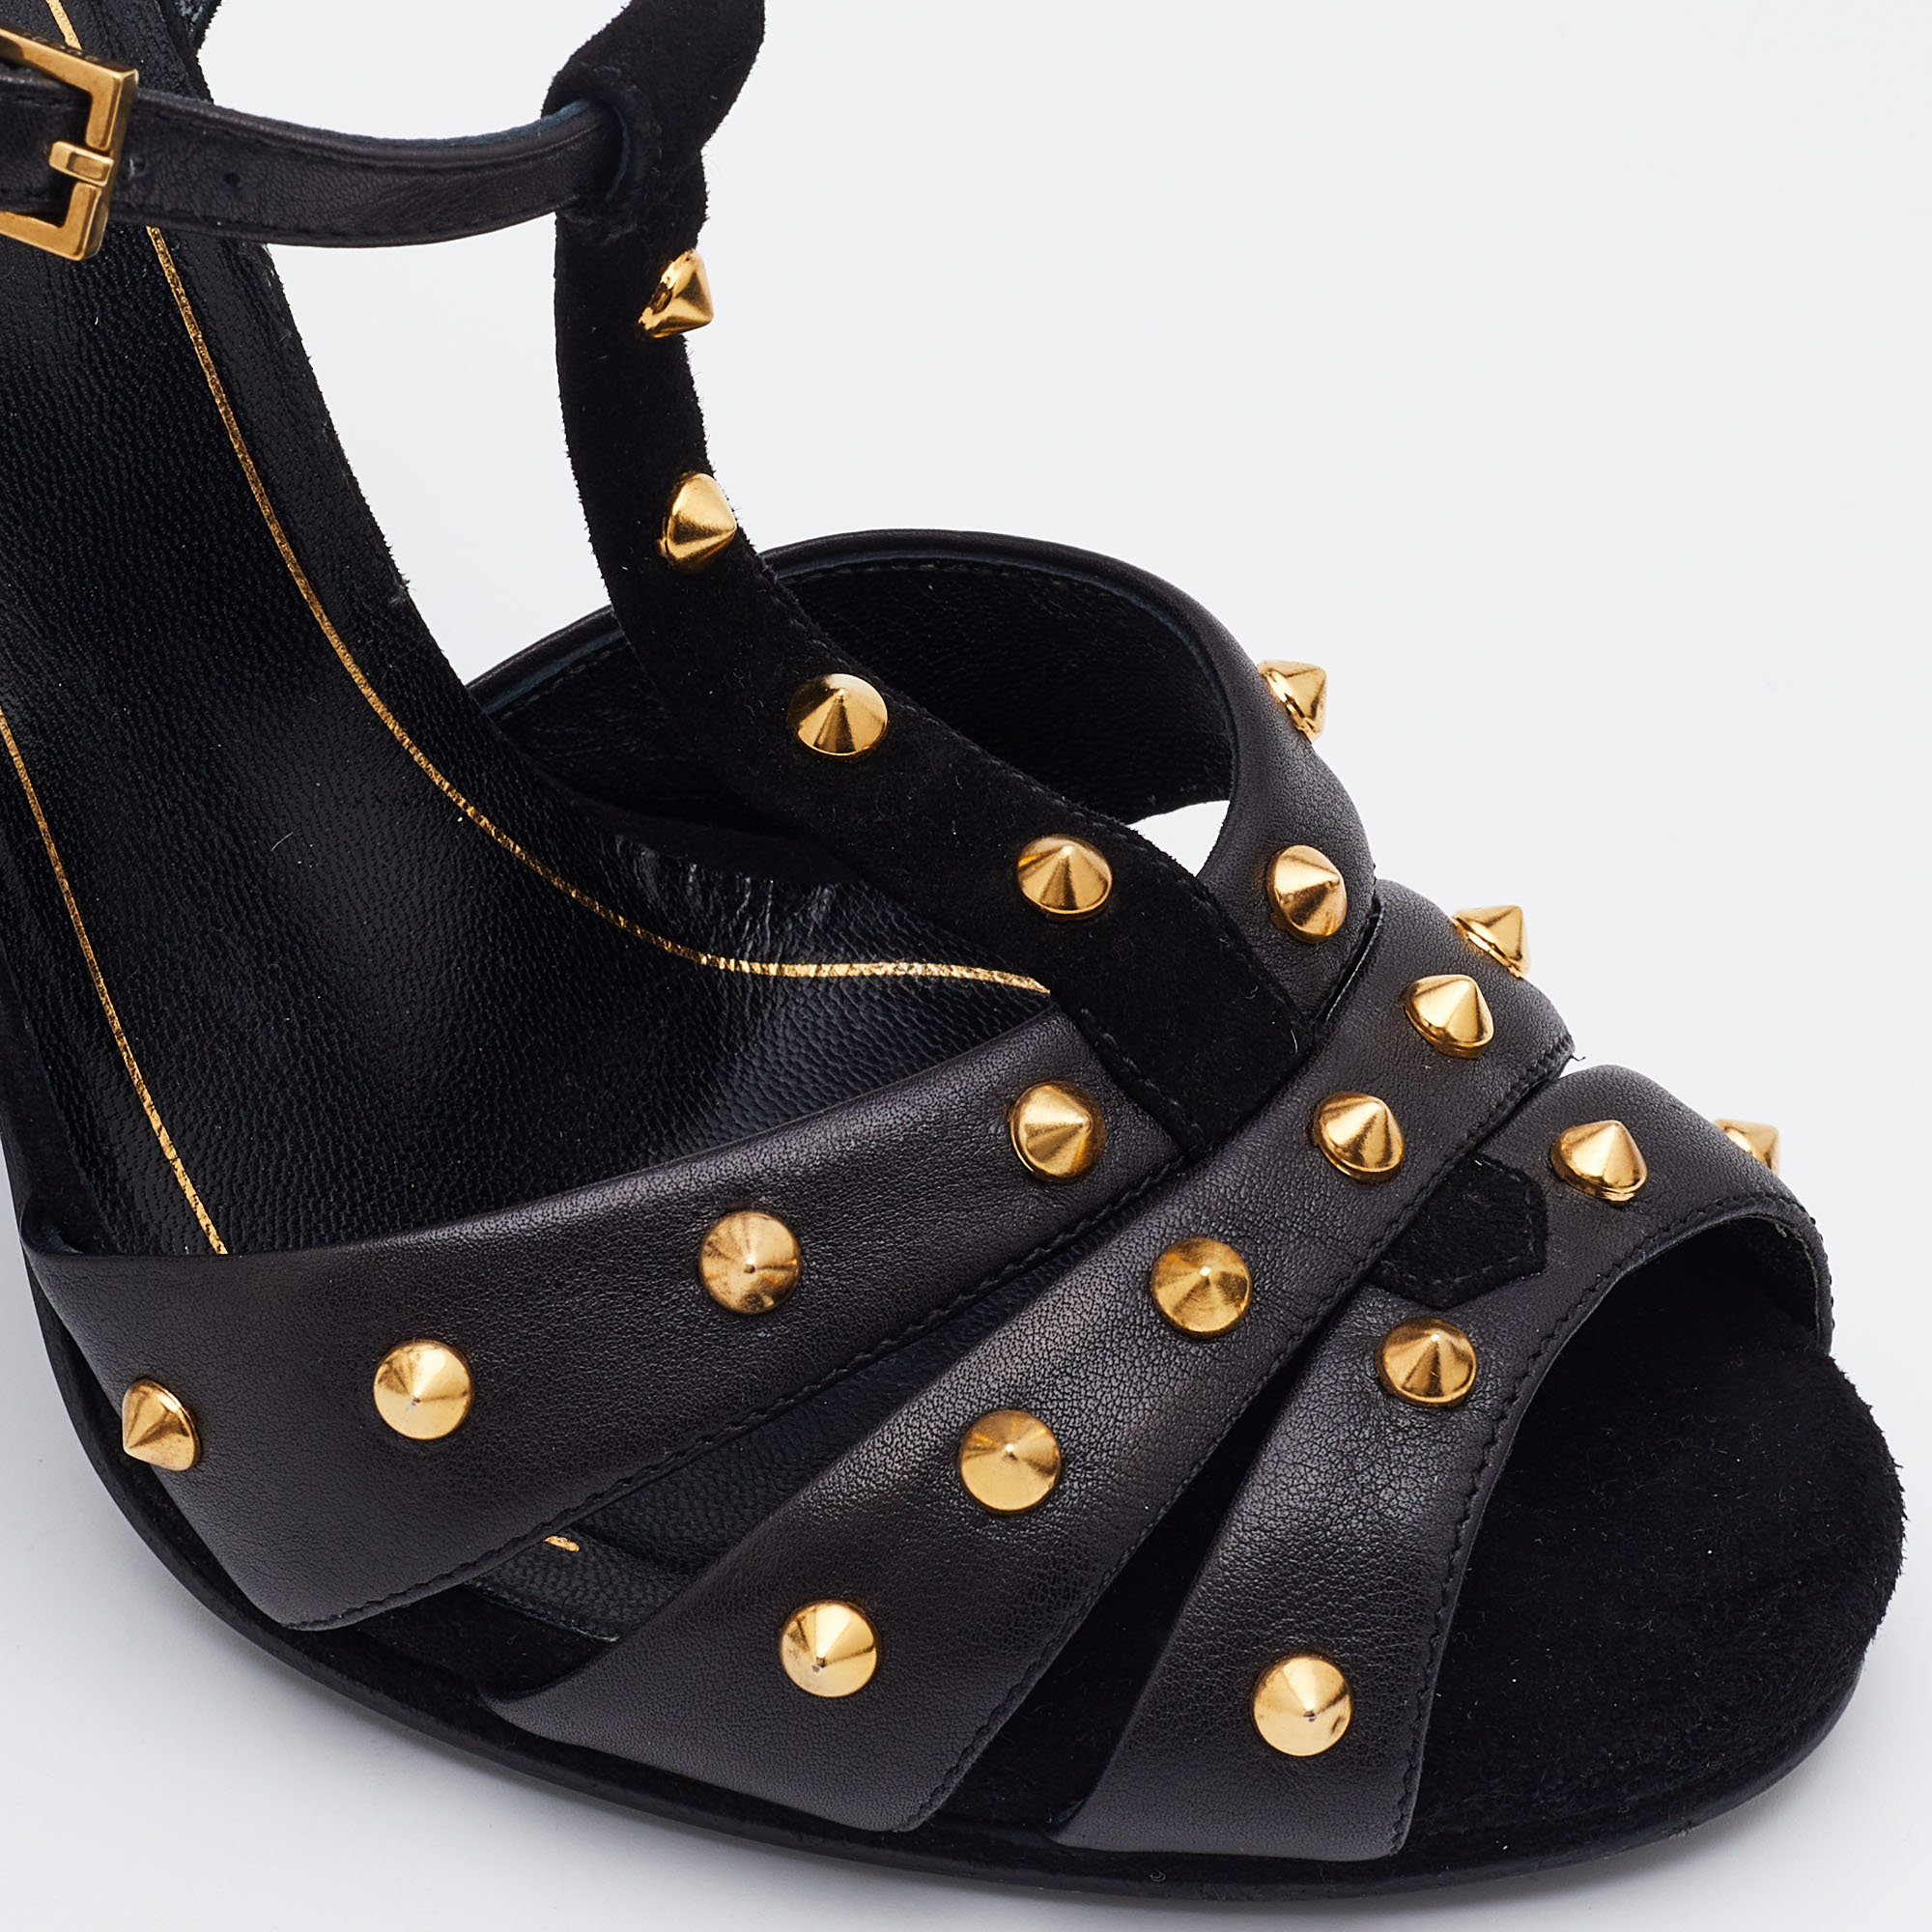 Gucci Black Suede And Leather Studded Ankle Strap Sandals Size 38